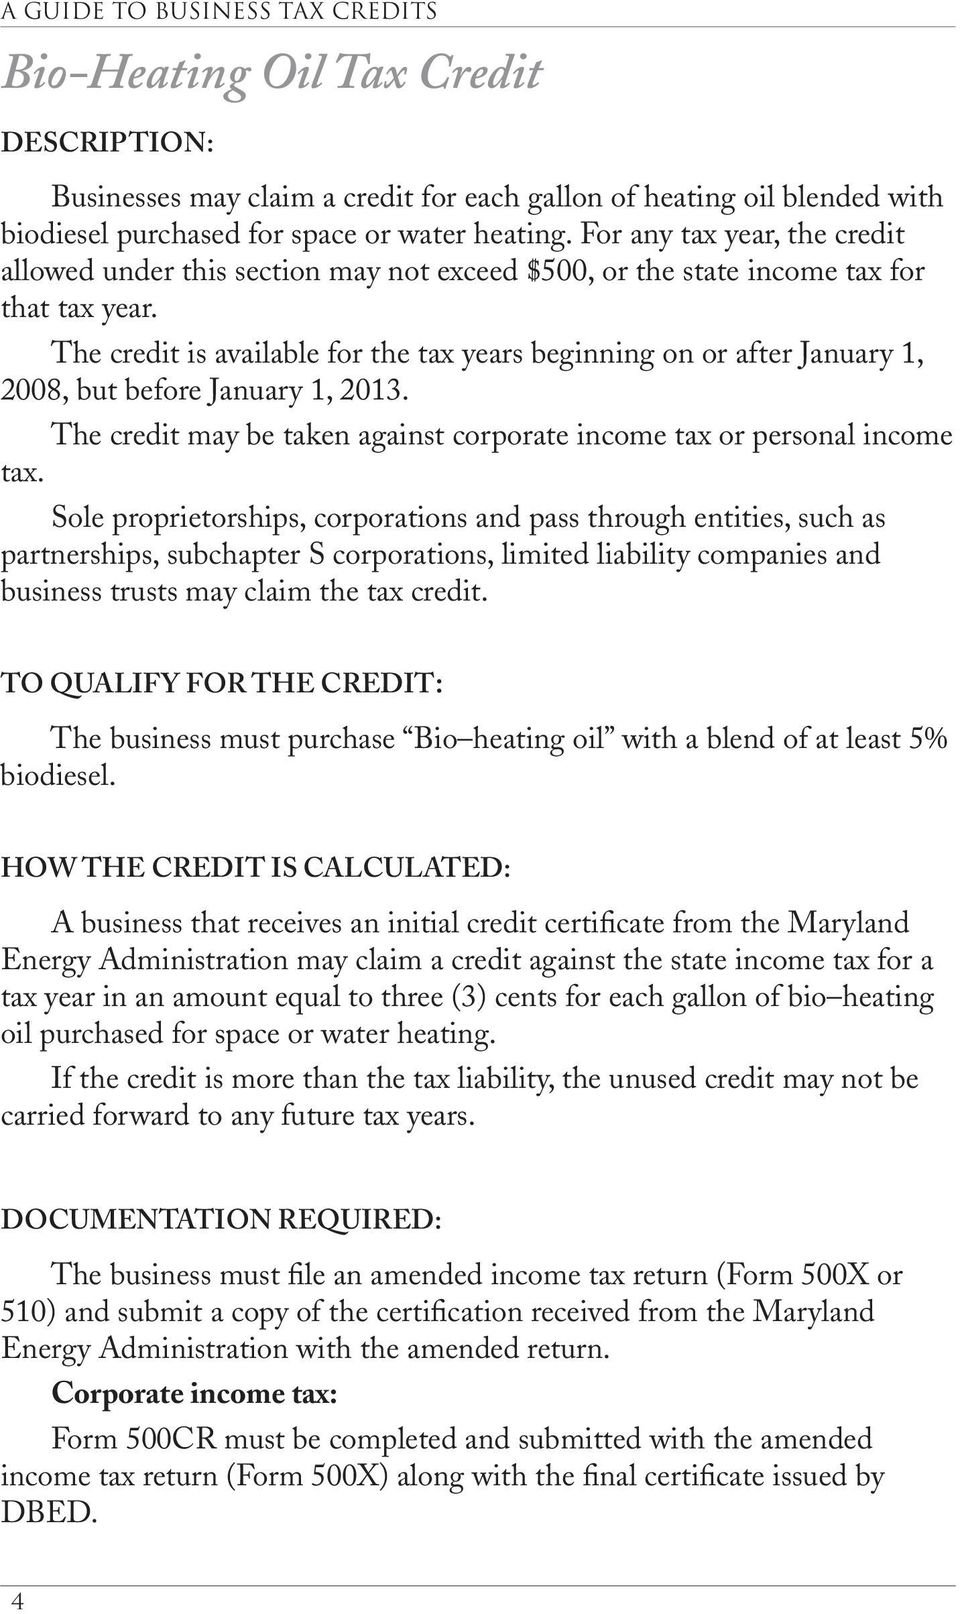 The credit is available for the tax years beginning on or after January 1, 2008, but before January 1, 2013. The credit may be taken against corporate income tax or personal income tax.